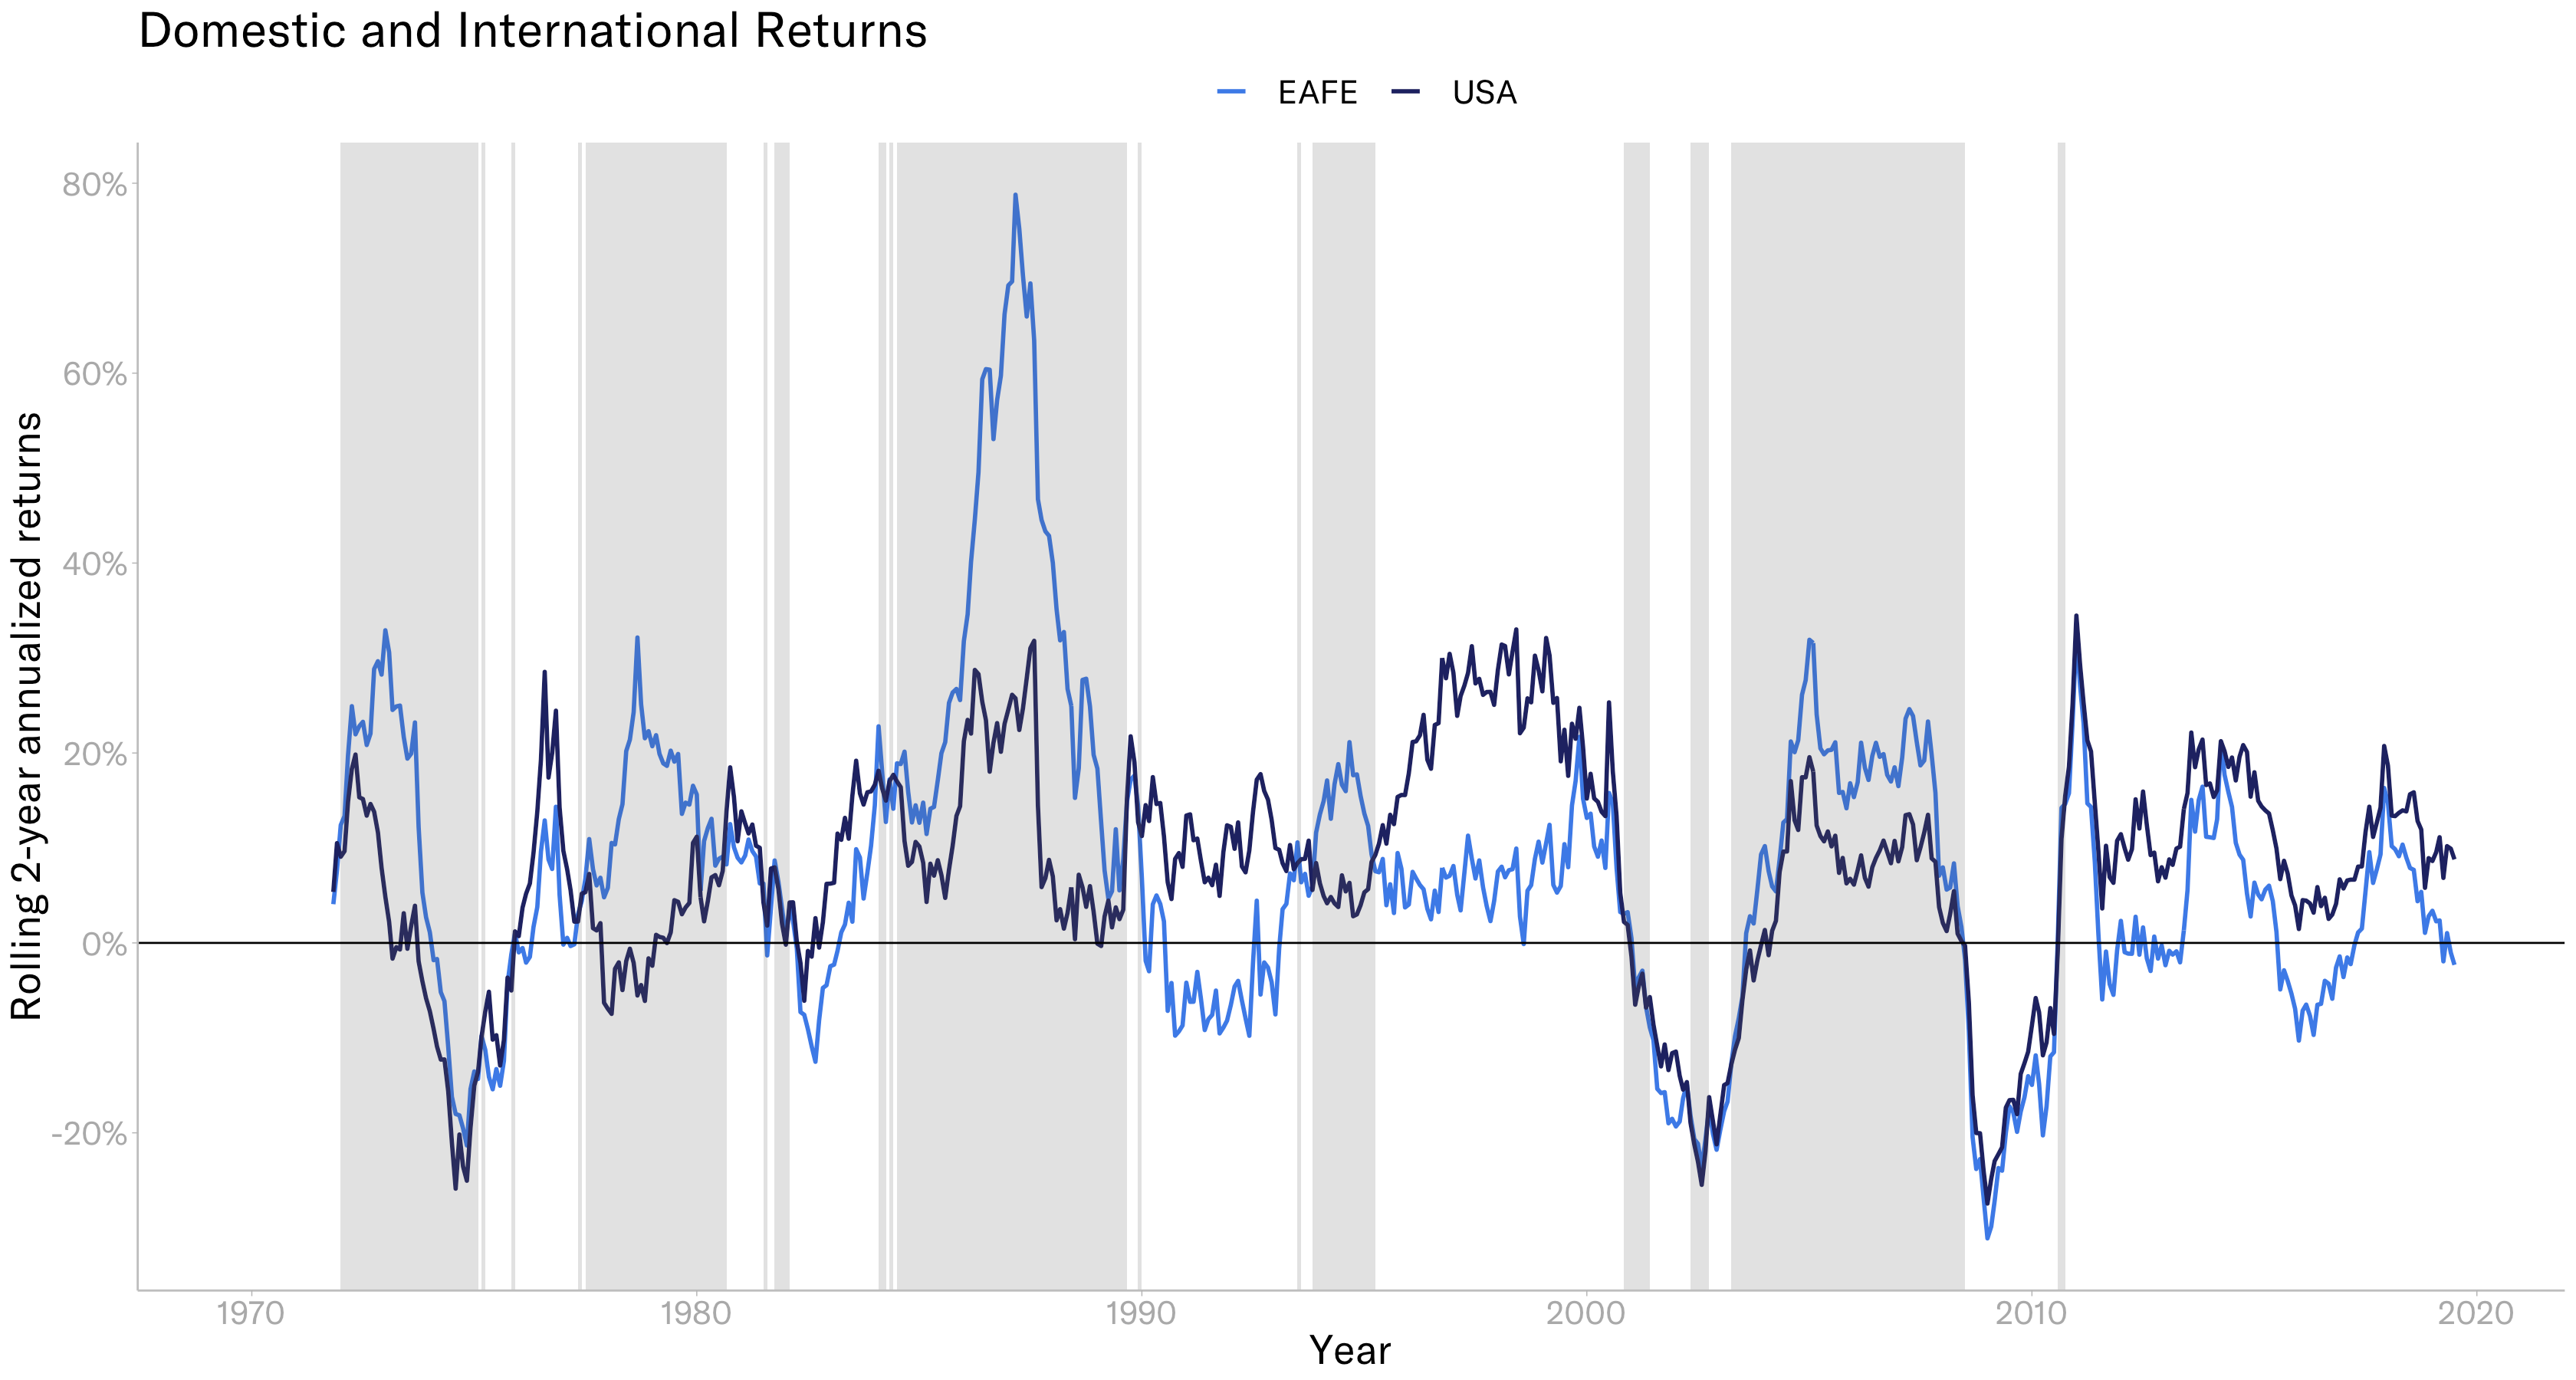 Graph showing domestic and international returns